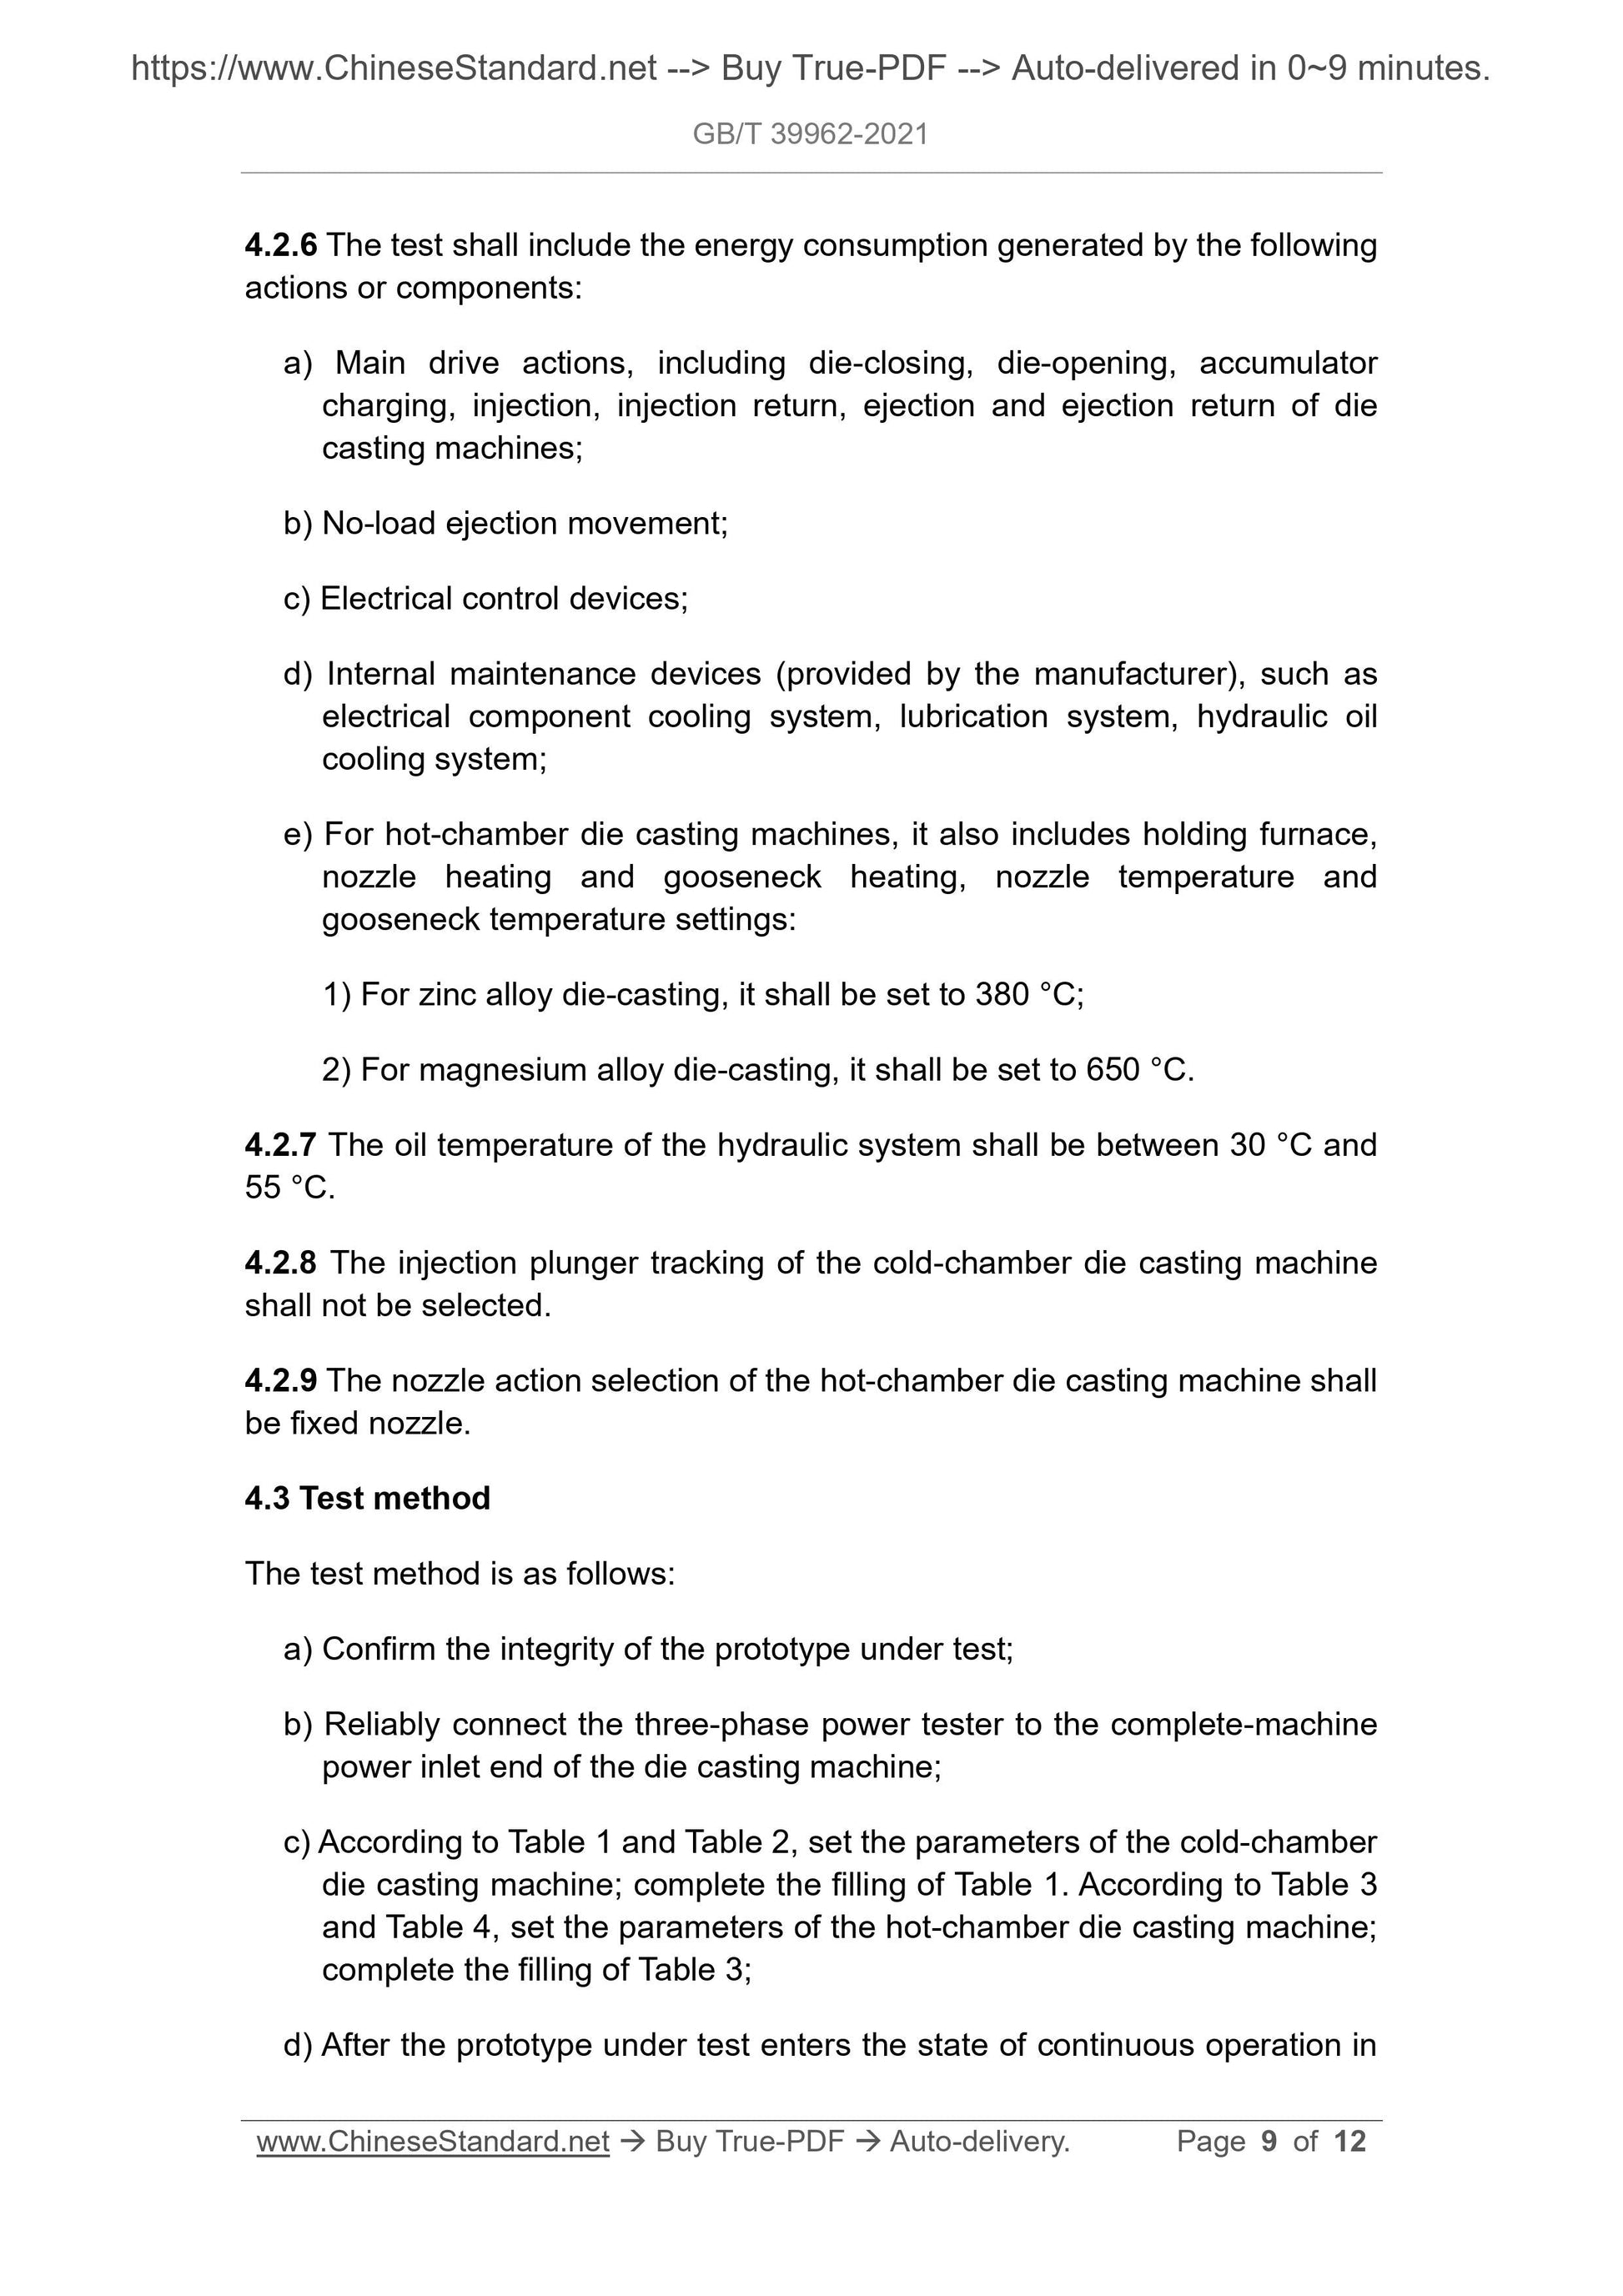 GB/T 39962-2021 Page 5